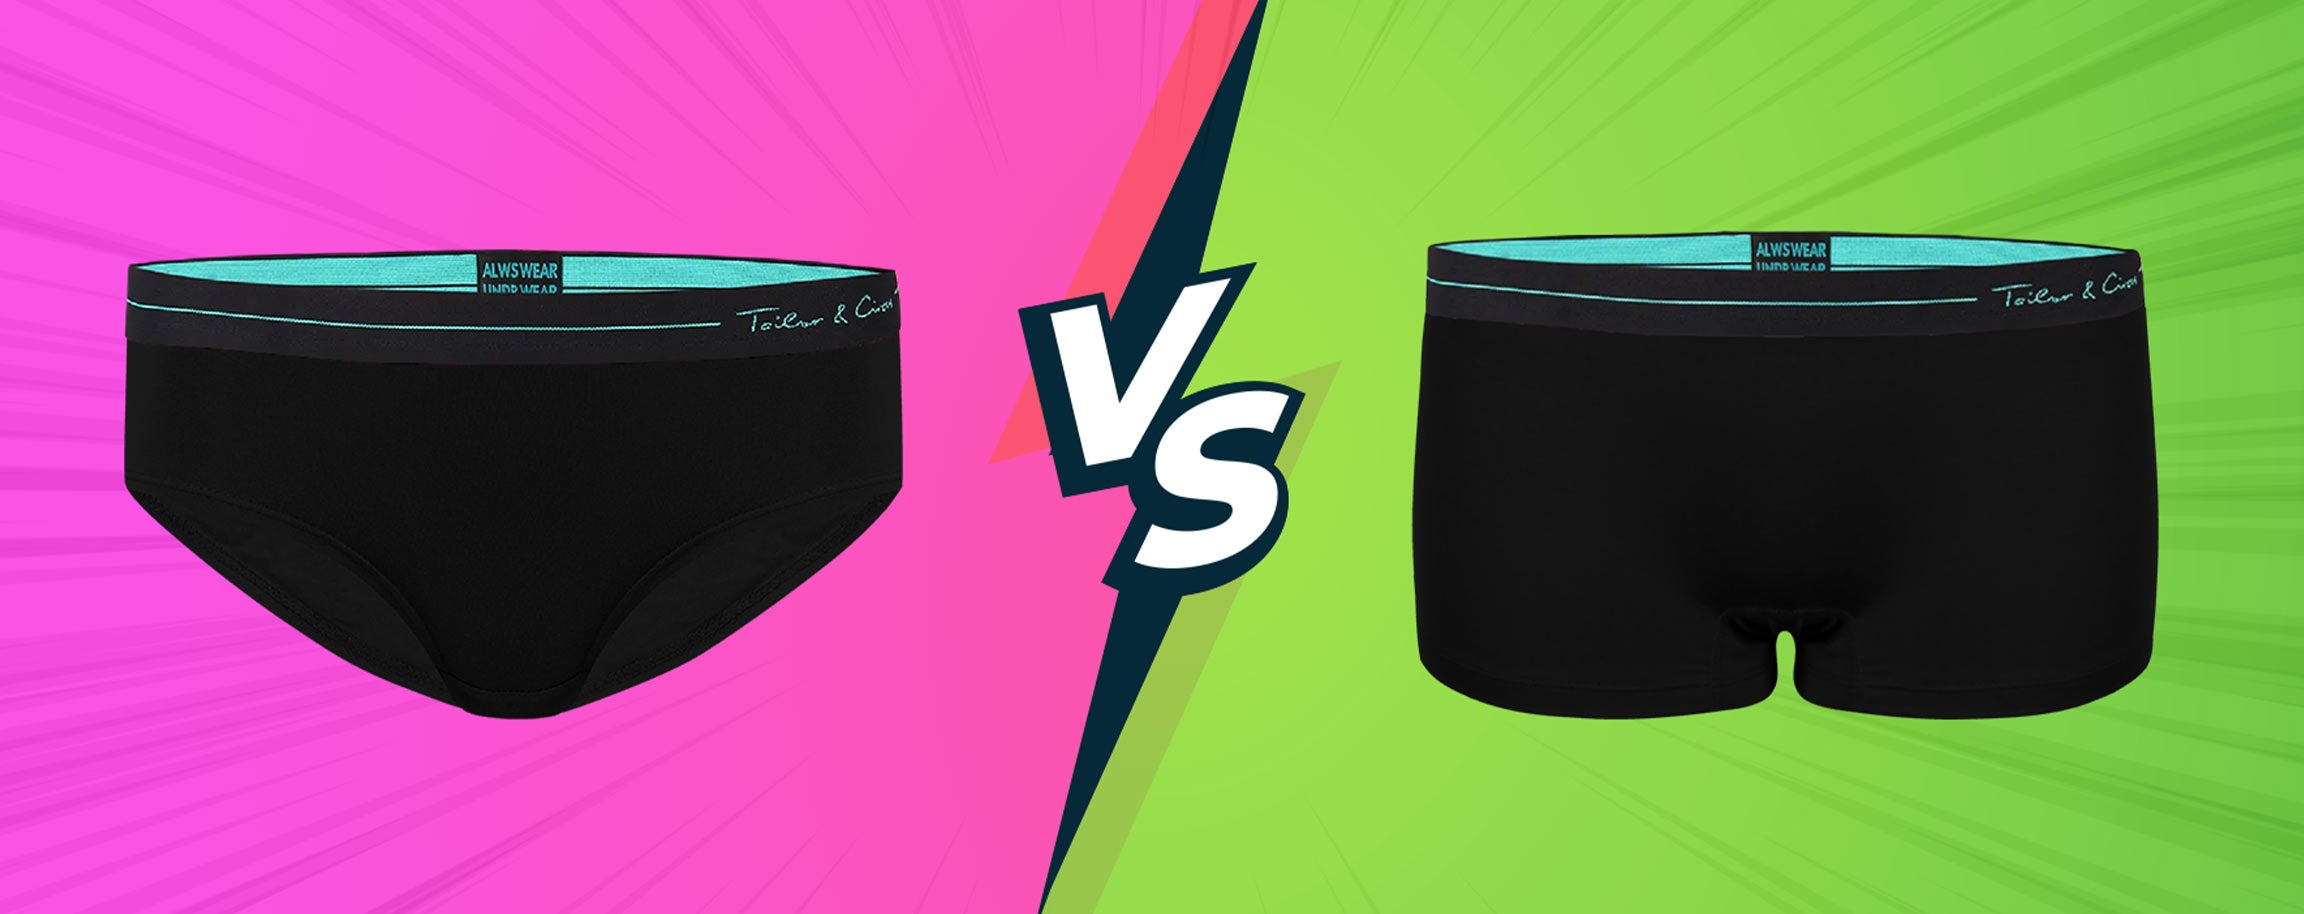 Trunks or Boxer Briefs: What's the Difference?